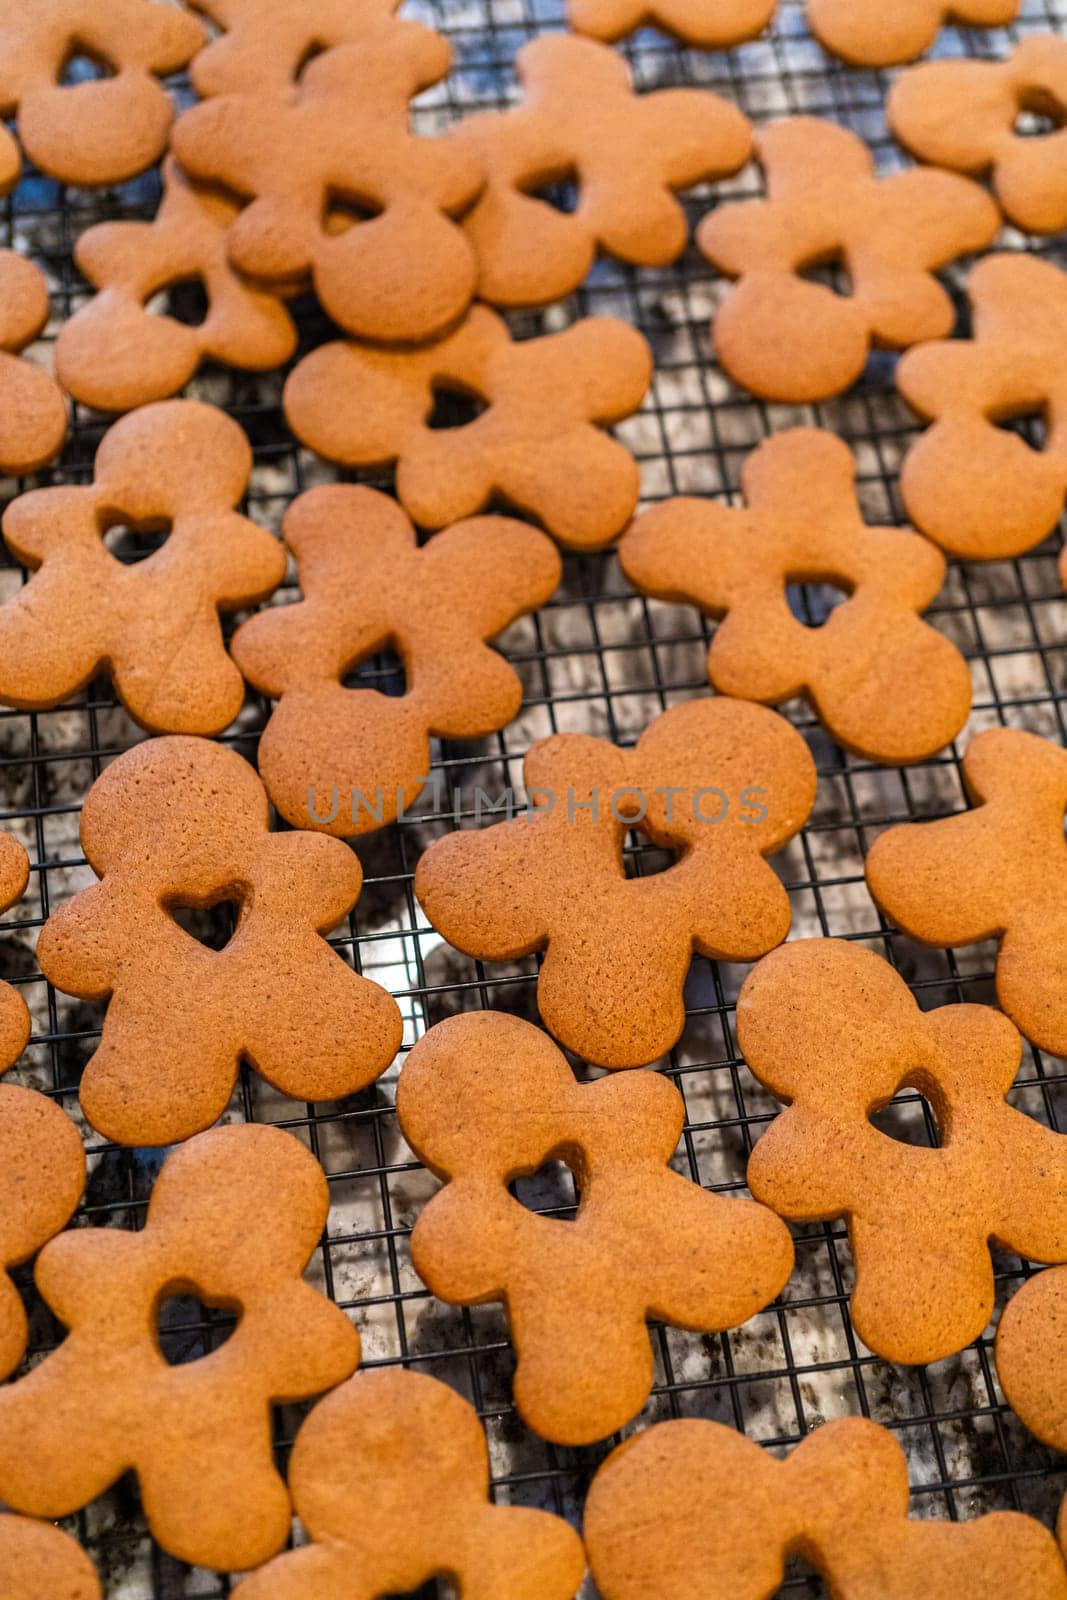 Freshly baked gingerbread cookies find their place on a cooling wire rack in a modern white kitchen, filling the air with festive aromas.